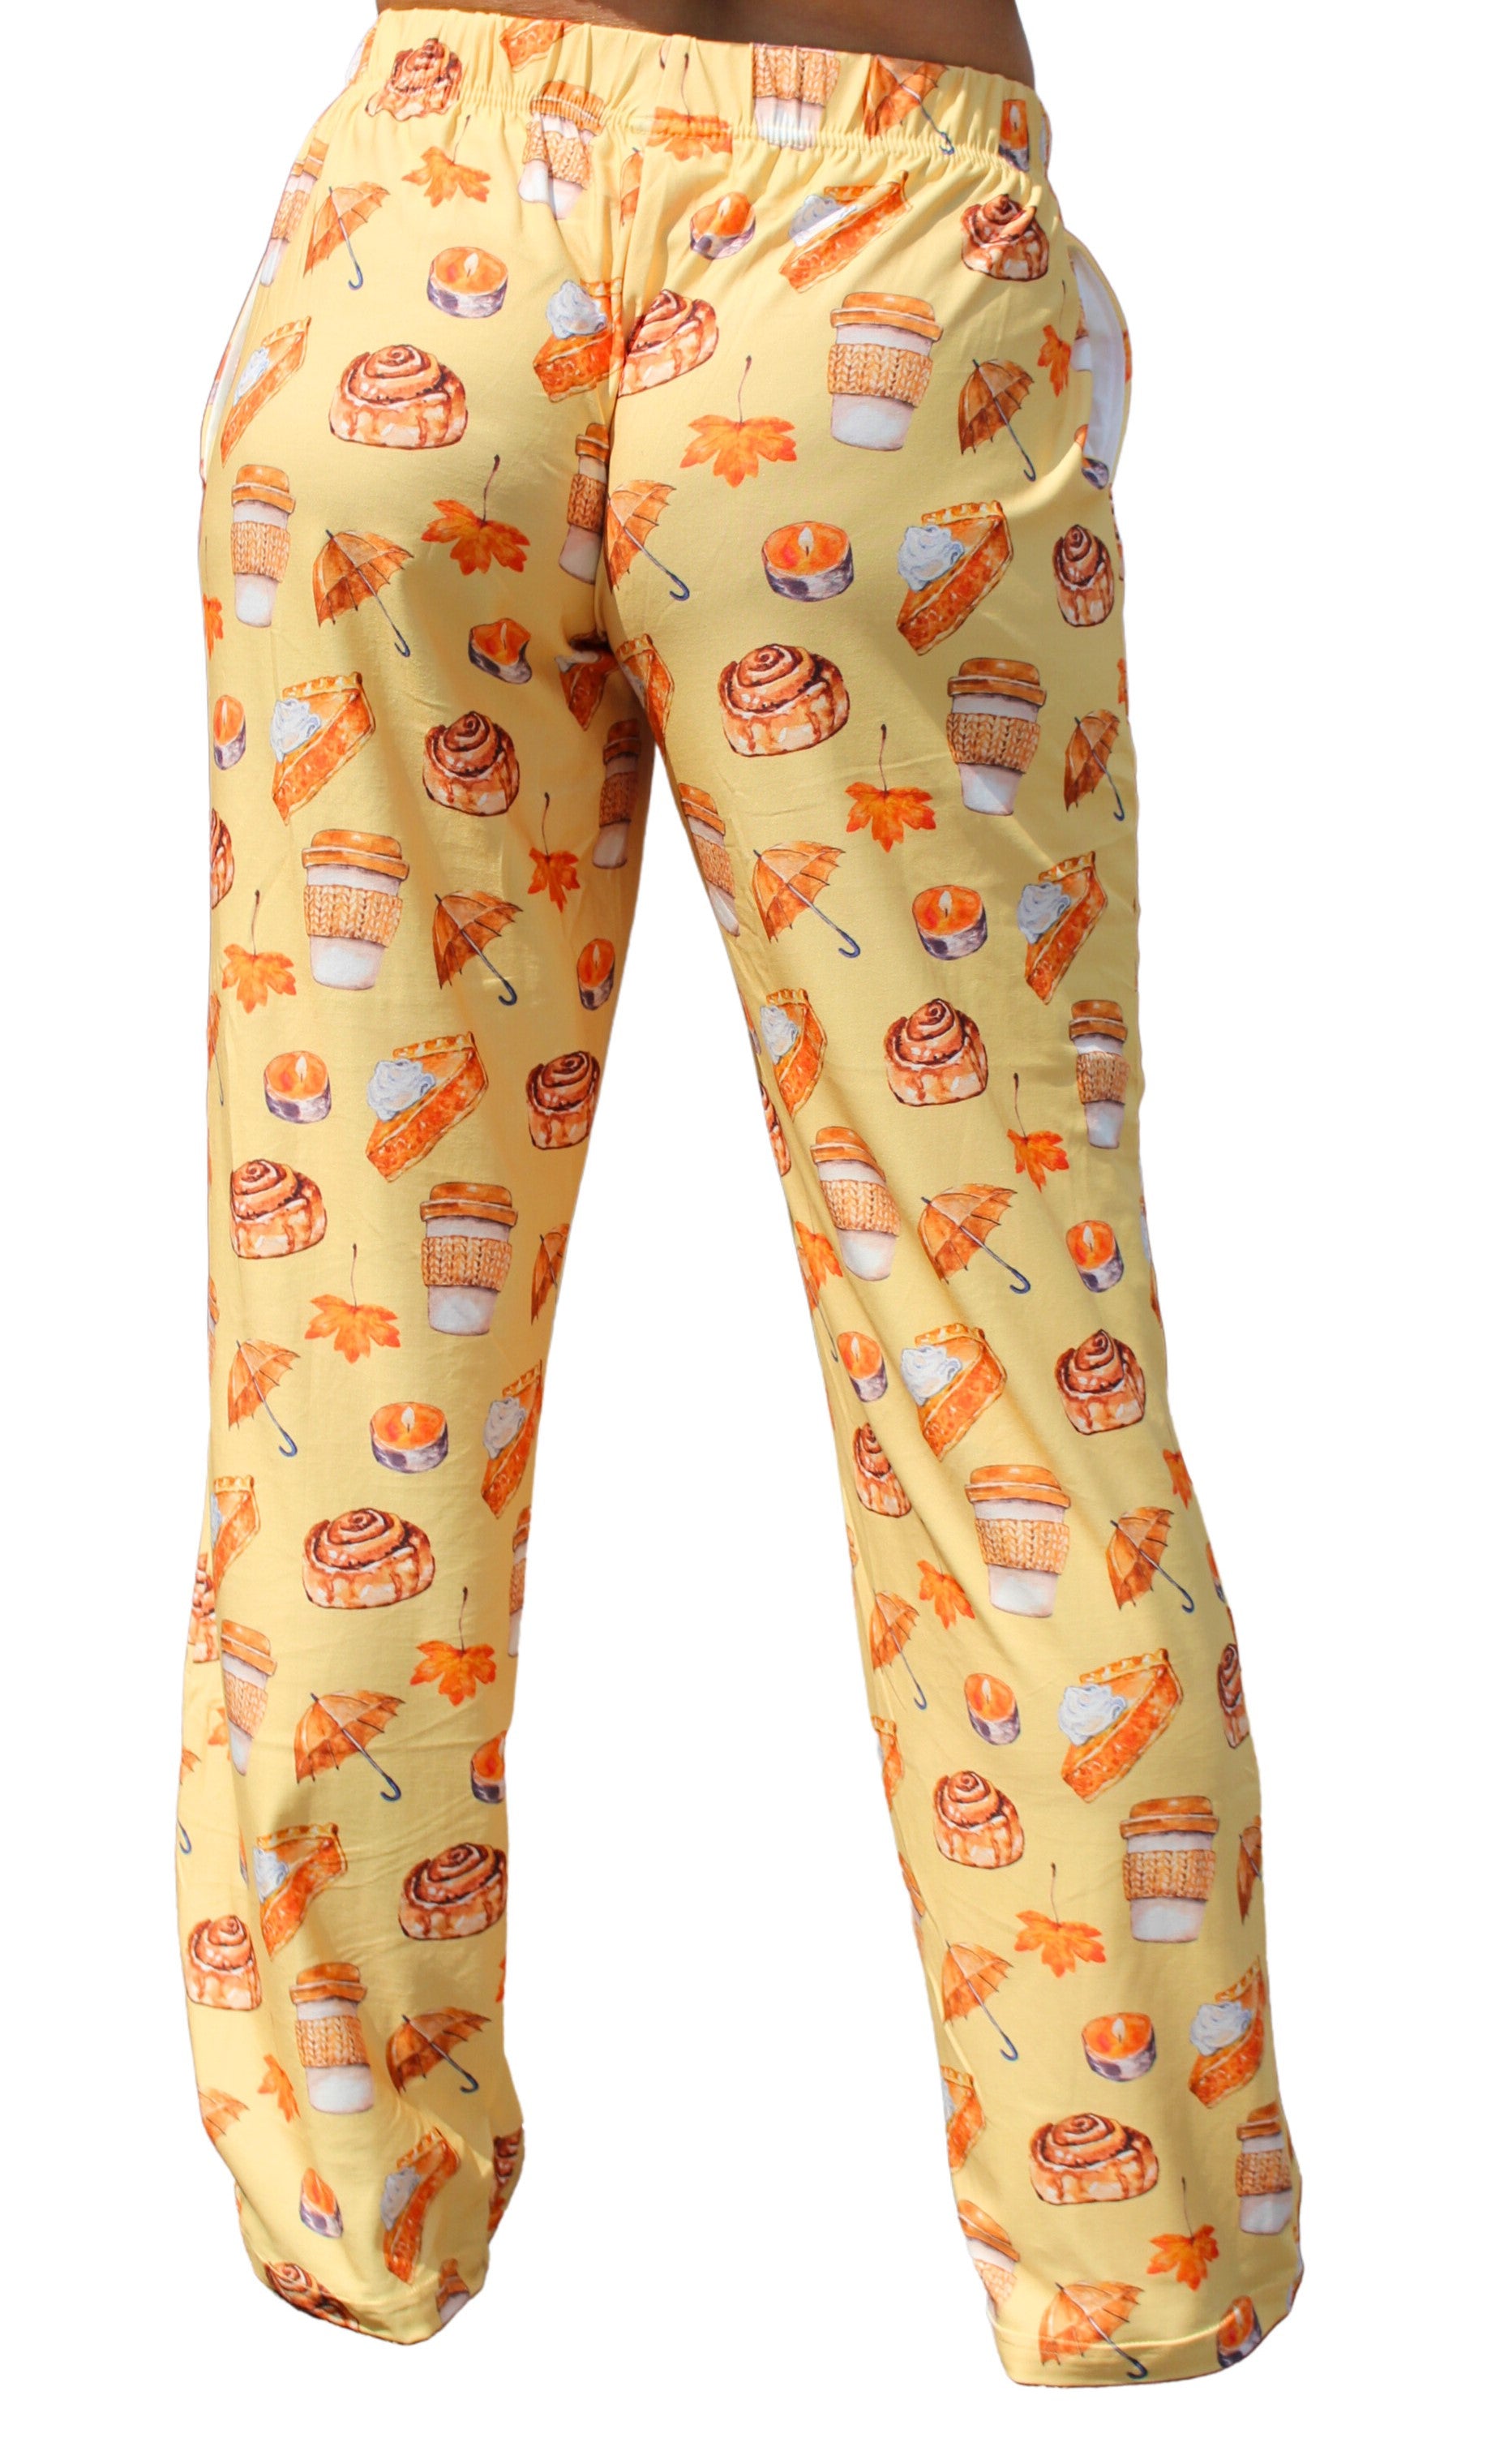 Autumn Leaves and Pumpkins Please Pajama Lounge Pants back view on model (waist down)